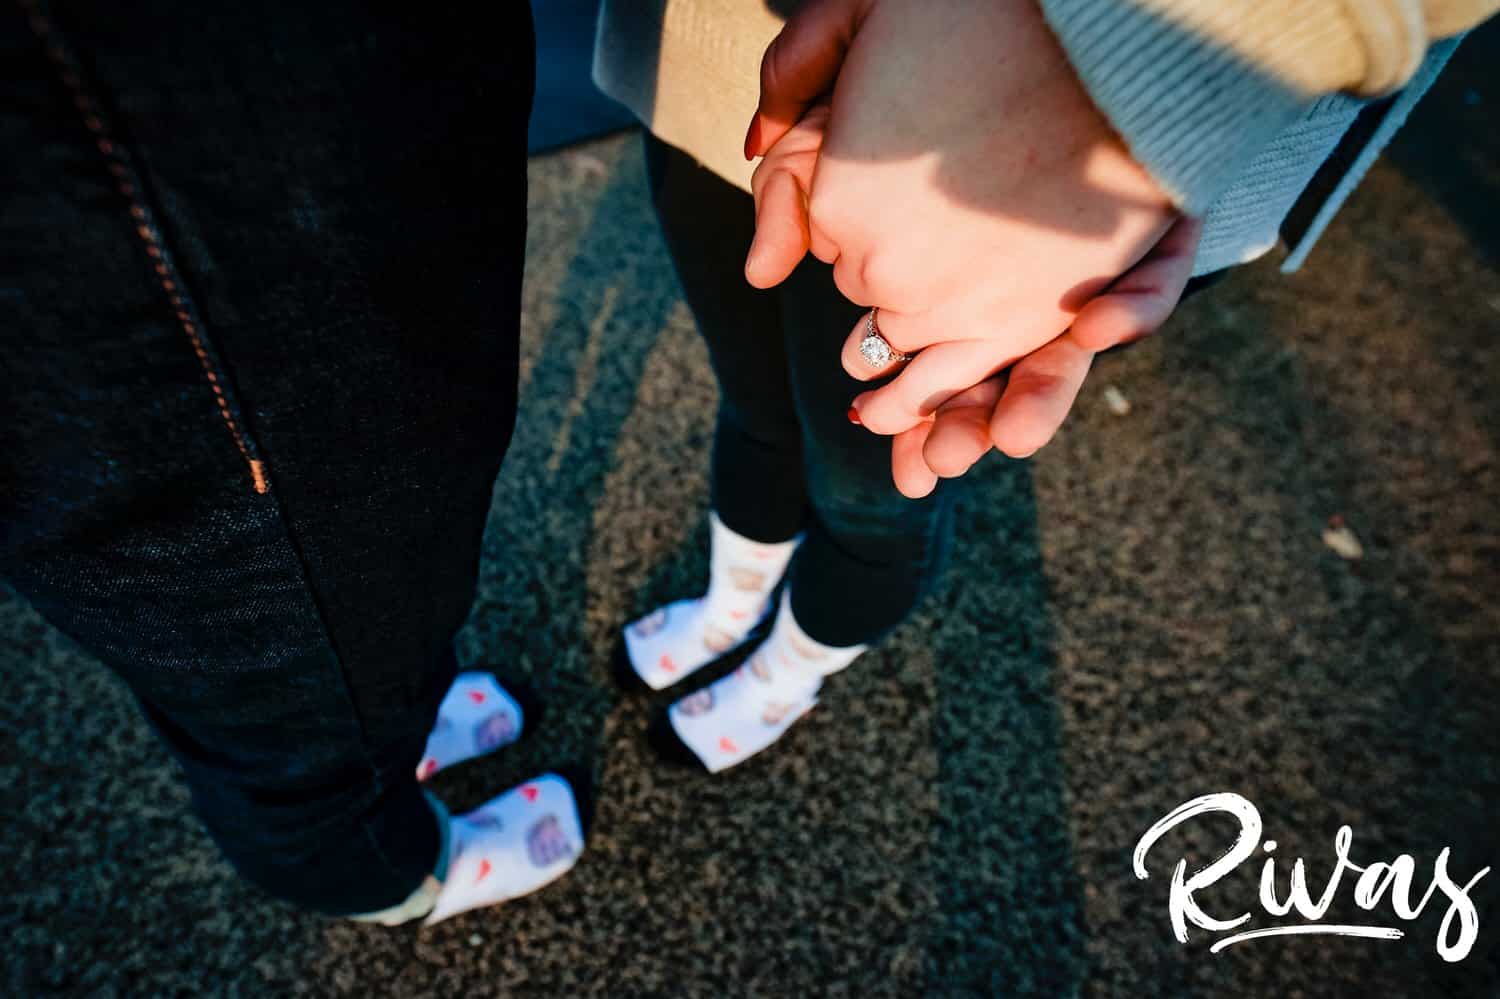 A tight, detailed picture of an engaged couple holding hands, with the picture focused on an engagement ring and their socks visible in the background. 